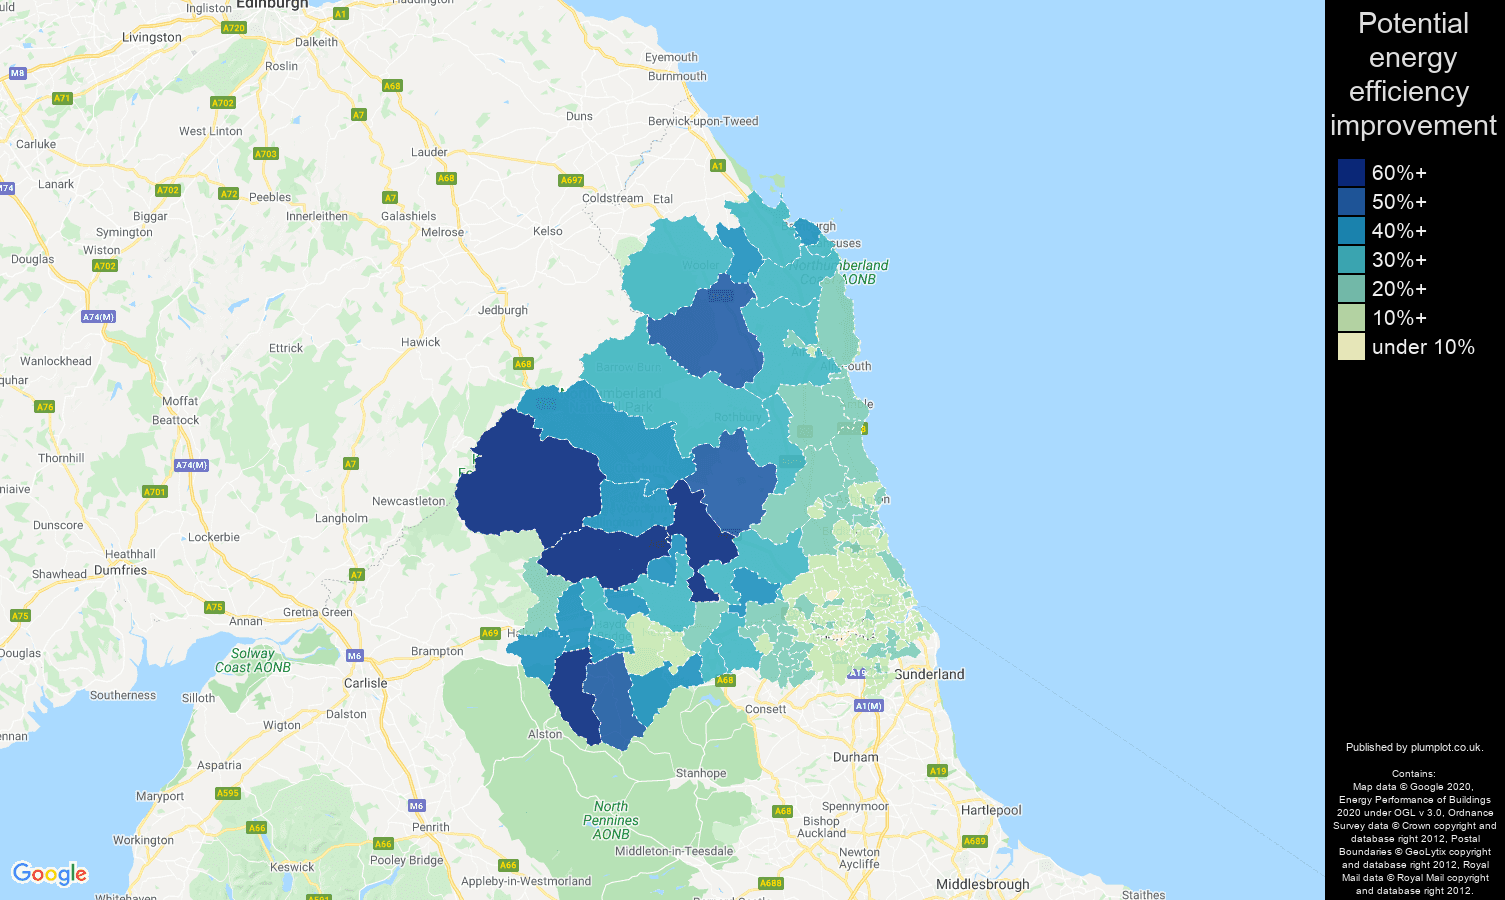 Newcastle upon Tyne map of potential energy efficiency improvement of properties